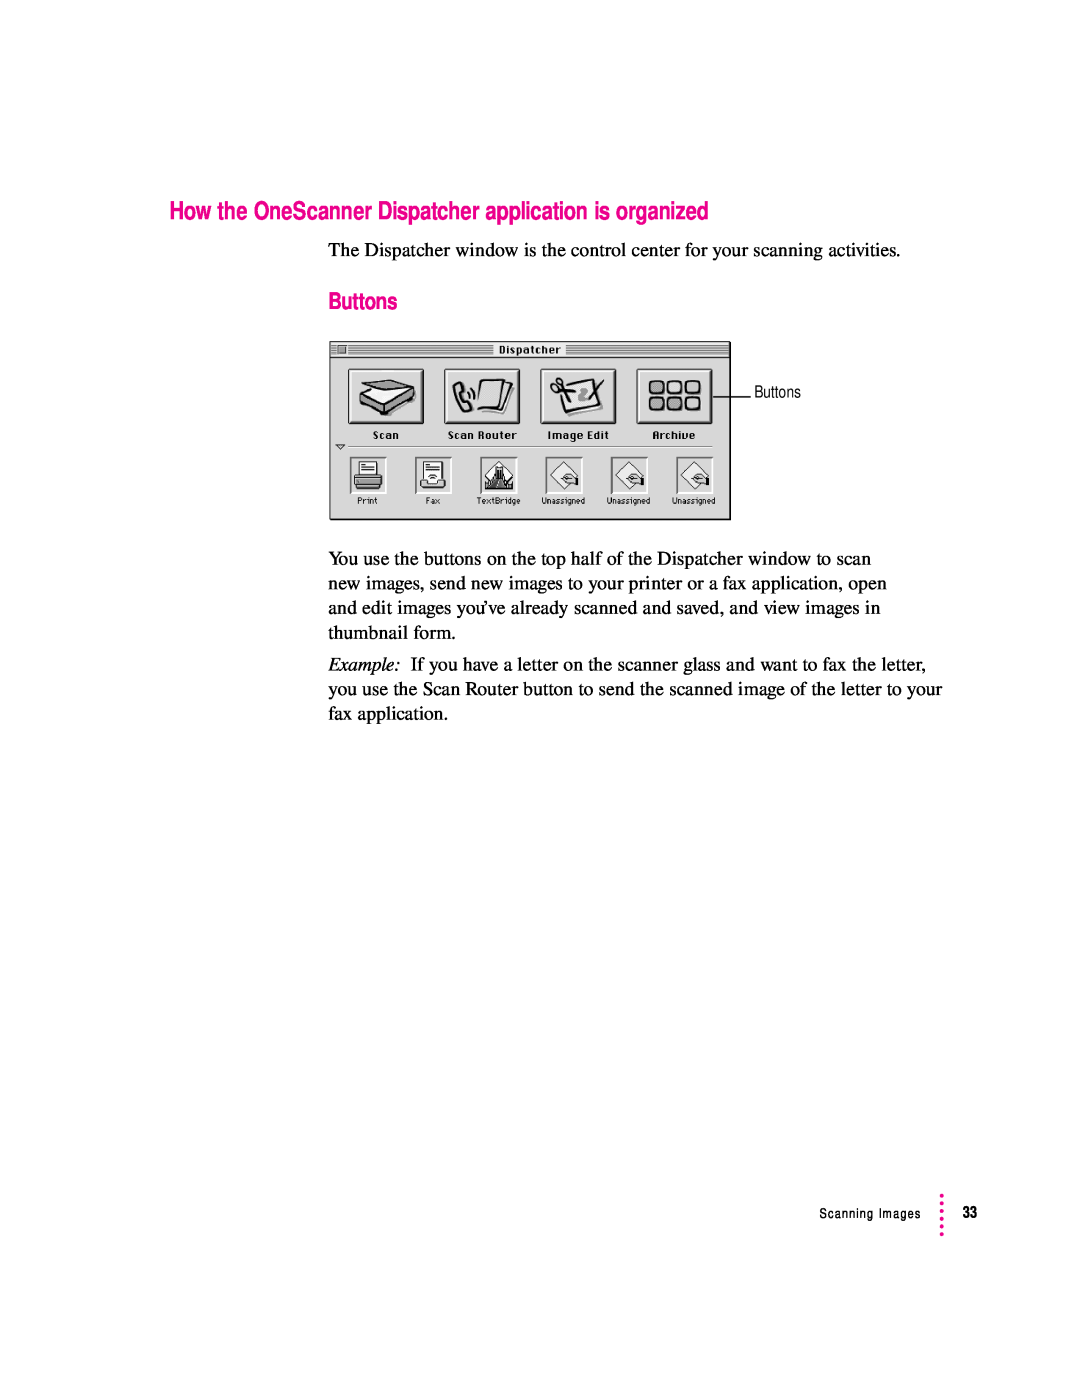 Apple 1230, 627 user manual How the OneScanner Dispatcher application is organized, Buttons 